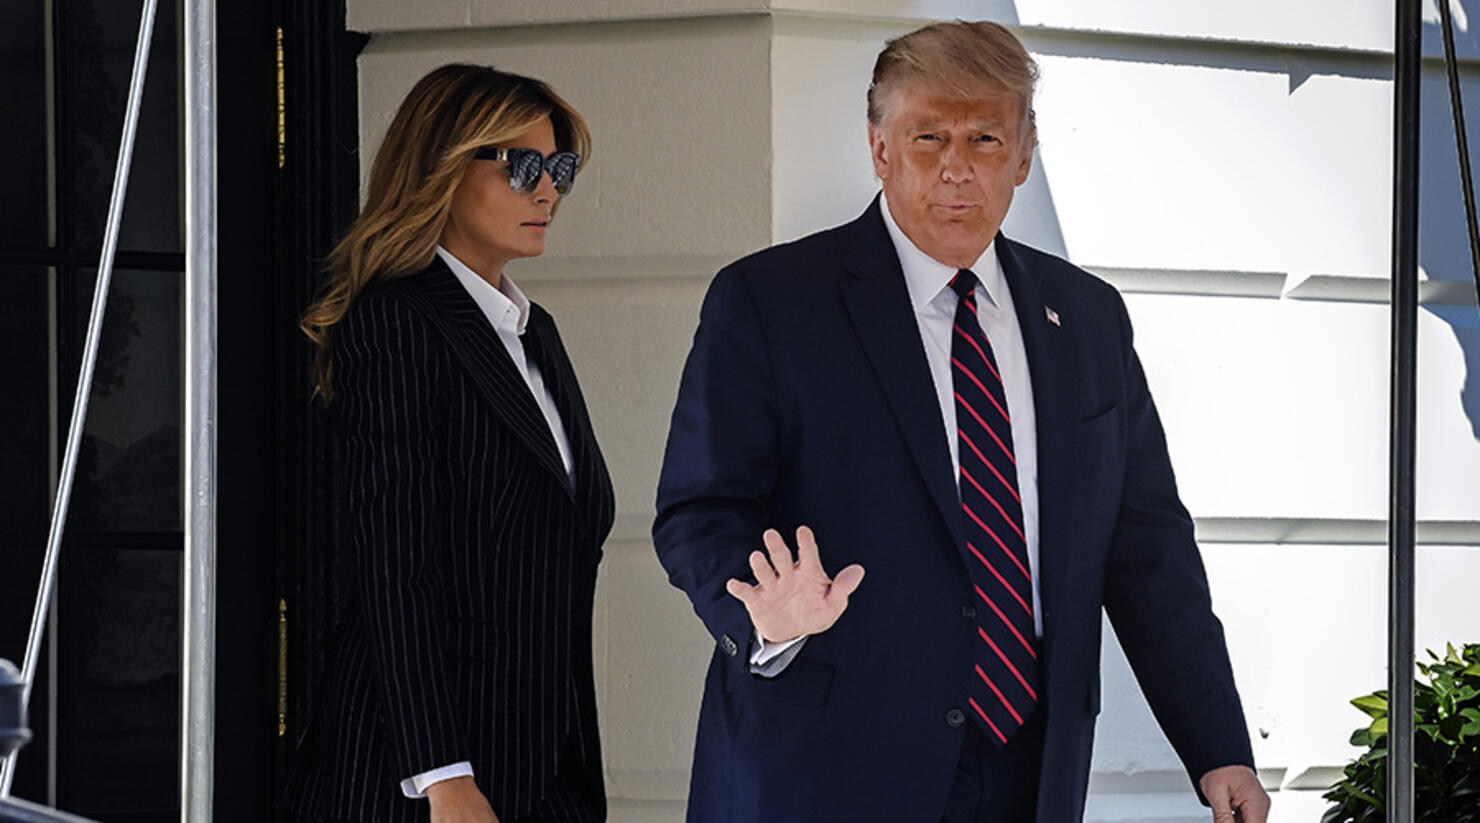 President Trump, en route to Cleveland for the first televised debate with opponent Joe Biden, departs the White House, on September 29 in Washington, DC.